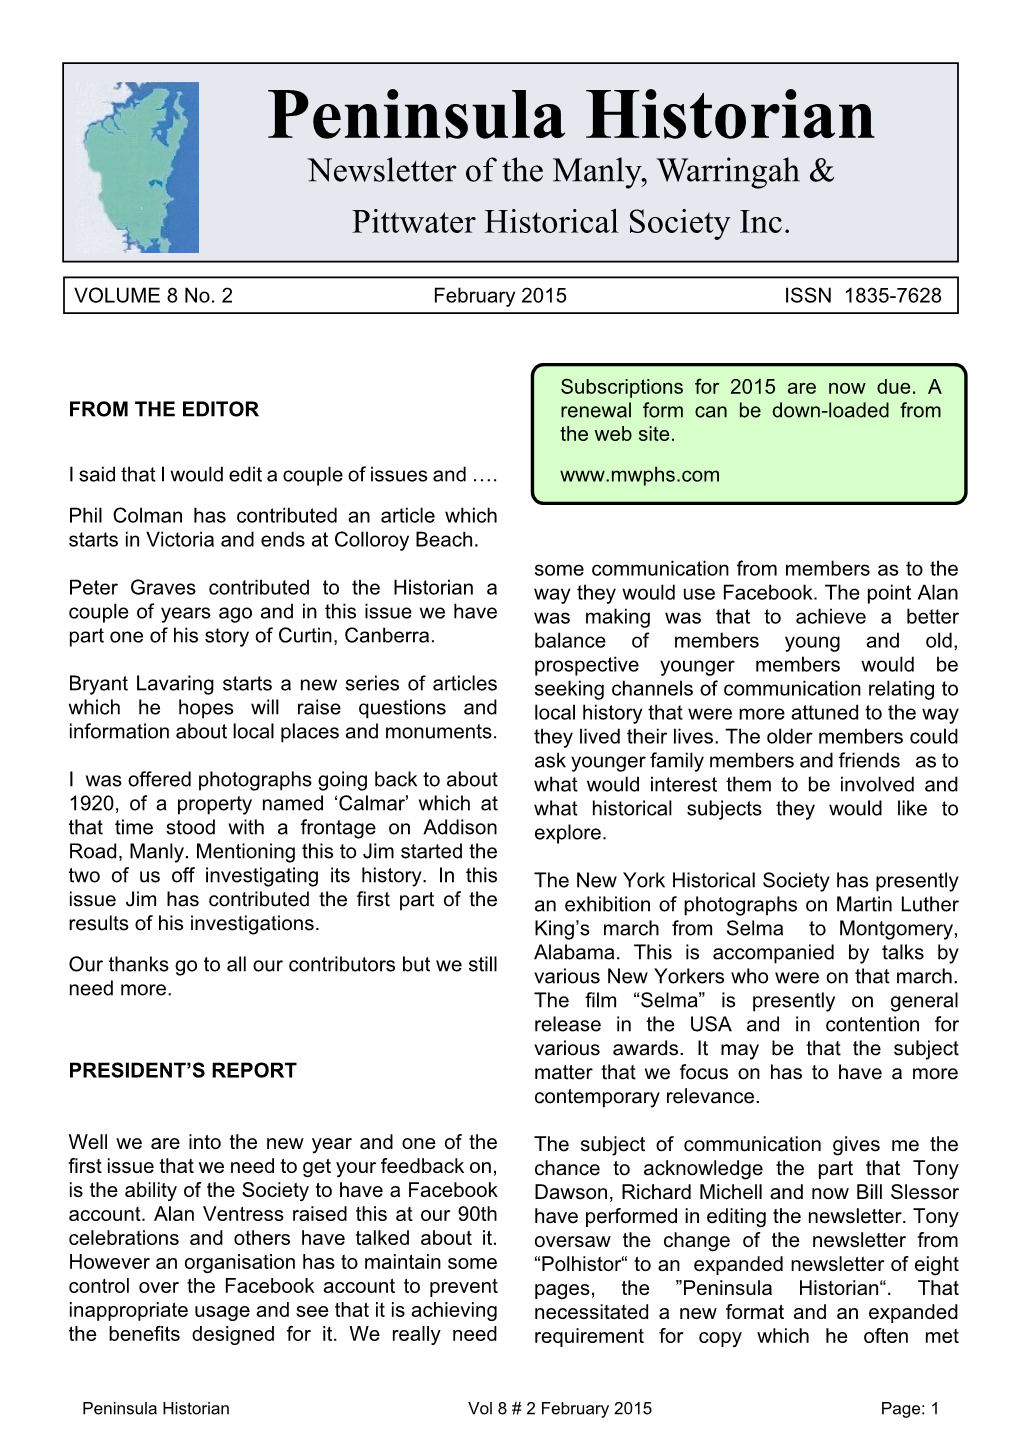 Peninsula Historian Newsletter of the Manly, Warringah & Pittwater Historical Society Inc